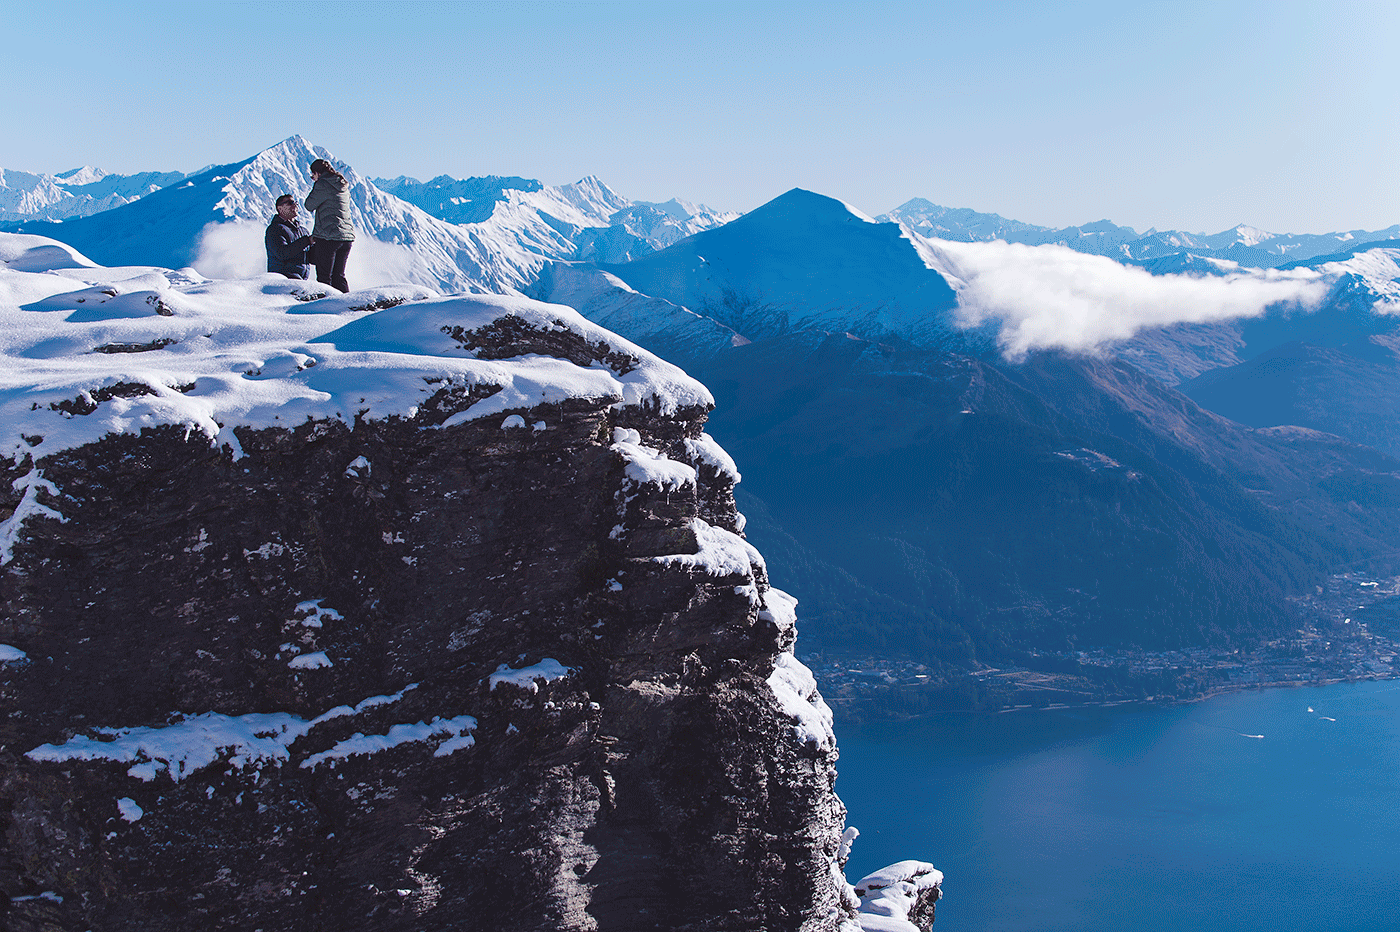 blog post featured image epic queenstown surprise proposal locations Simon proposes to Kelly during a surprise heli proposal at a snowy Cecil Peak (AKA The Ledge) - Fallon Photography snowy surprise Queenstown heli proposal